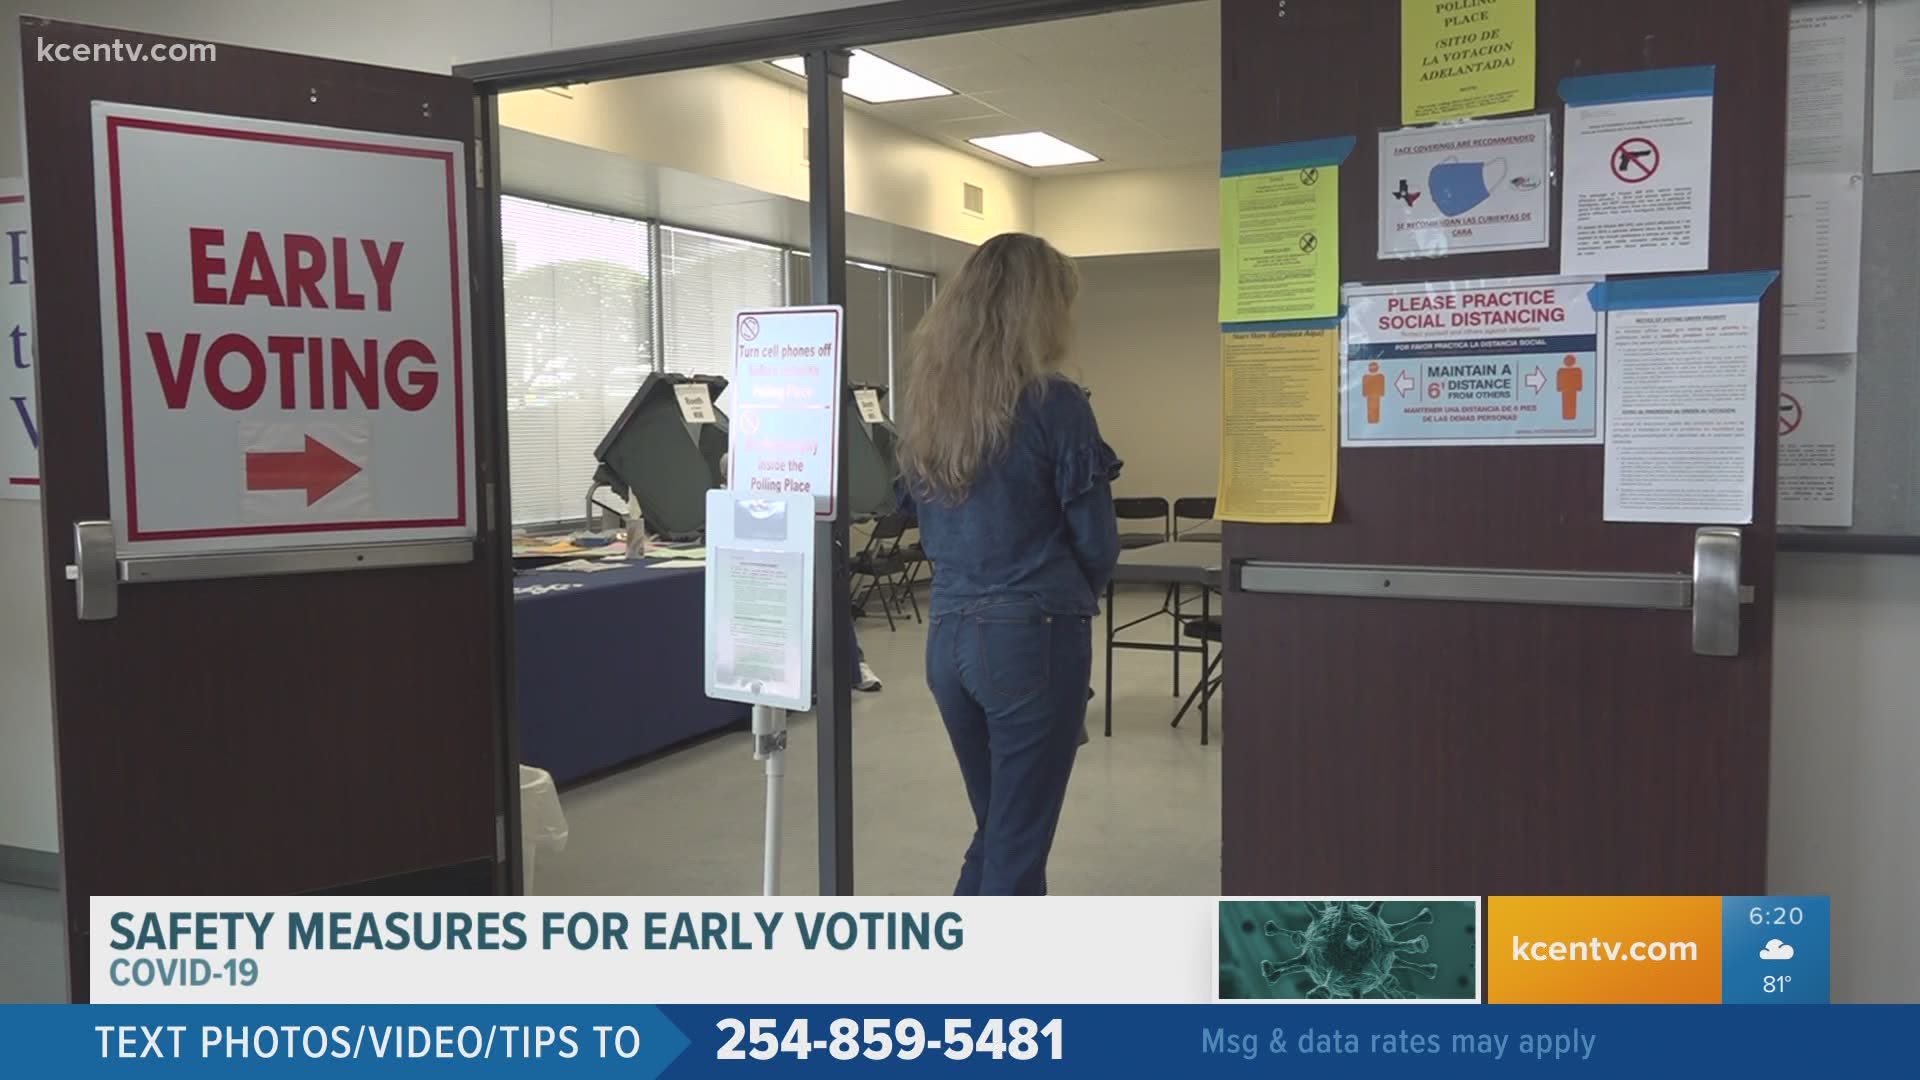 Texas Today's Maria Aguilera shows us some changes in McLennan County that are meant to keep voters safe.